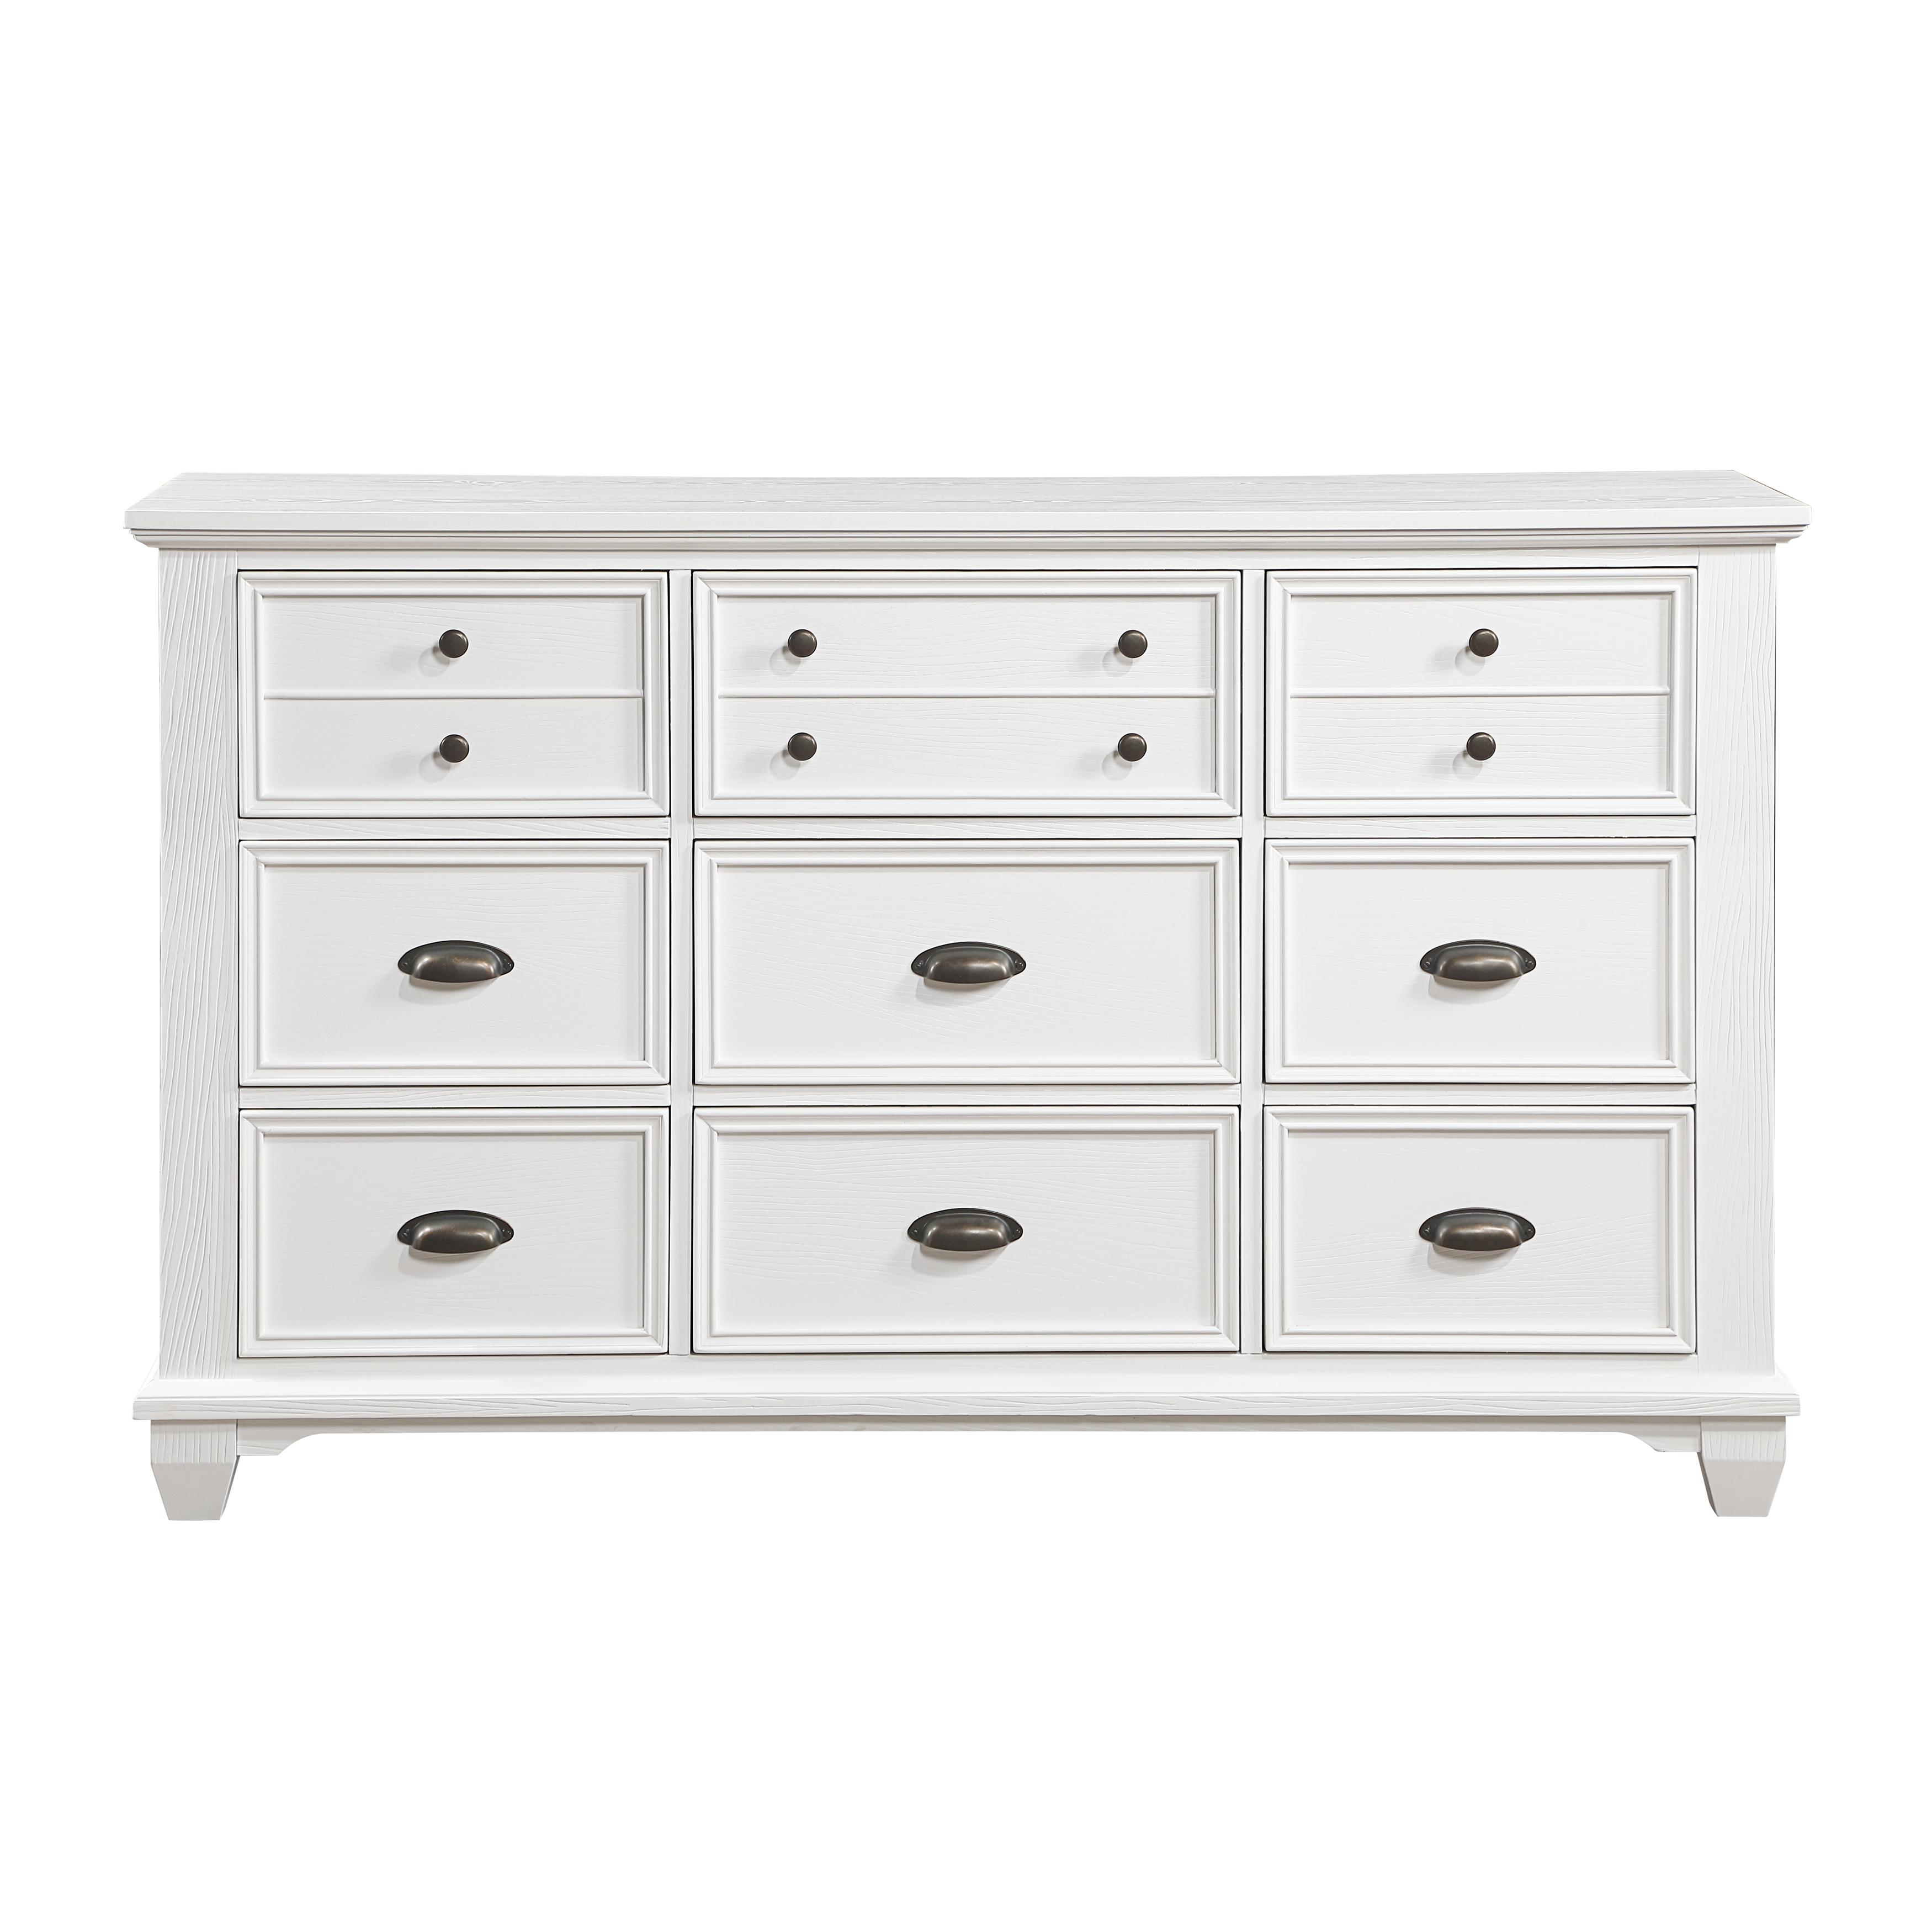 Homelegance Mackinac Collection Dresser With Mirror 1454-5-D-2PCS Dresser With Mirror